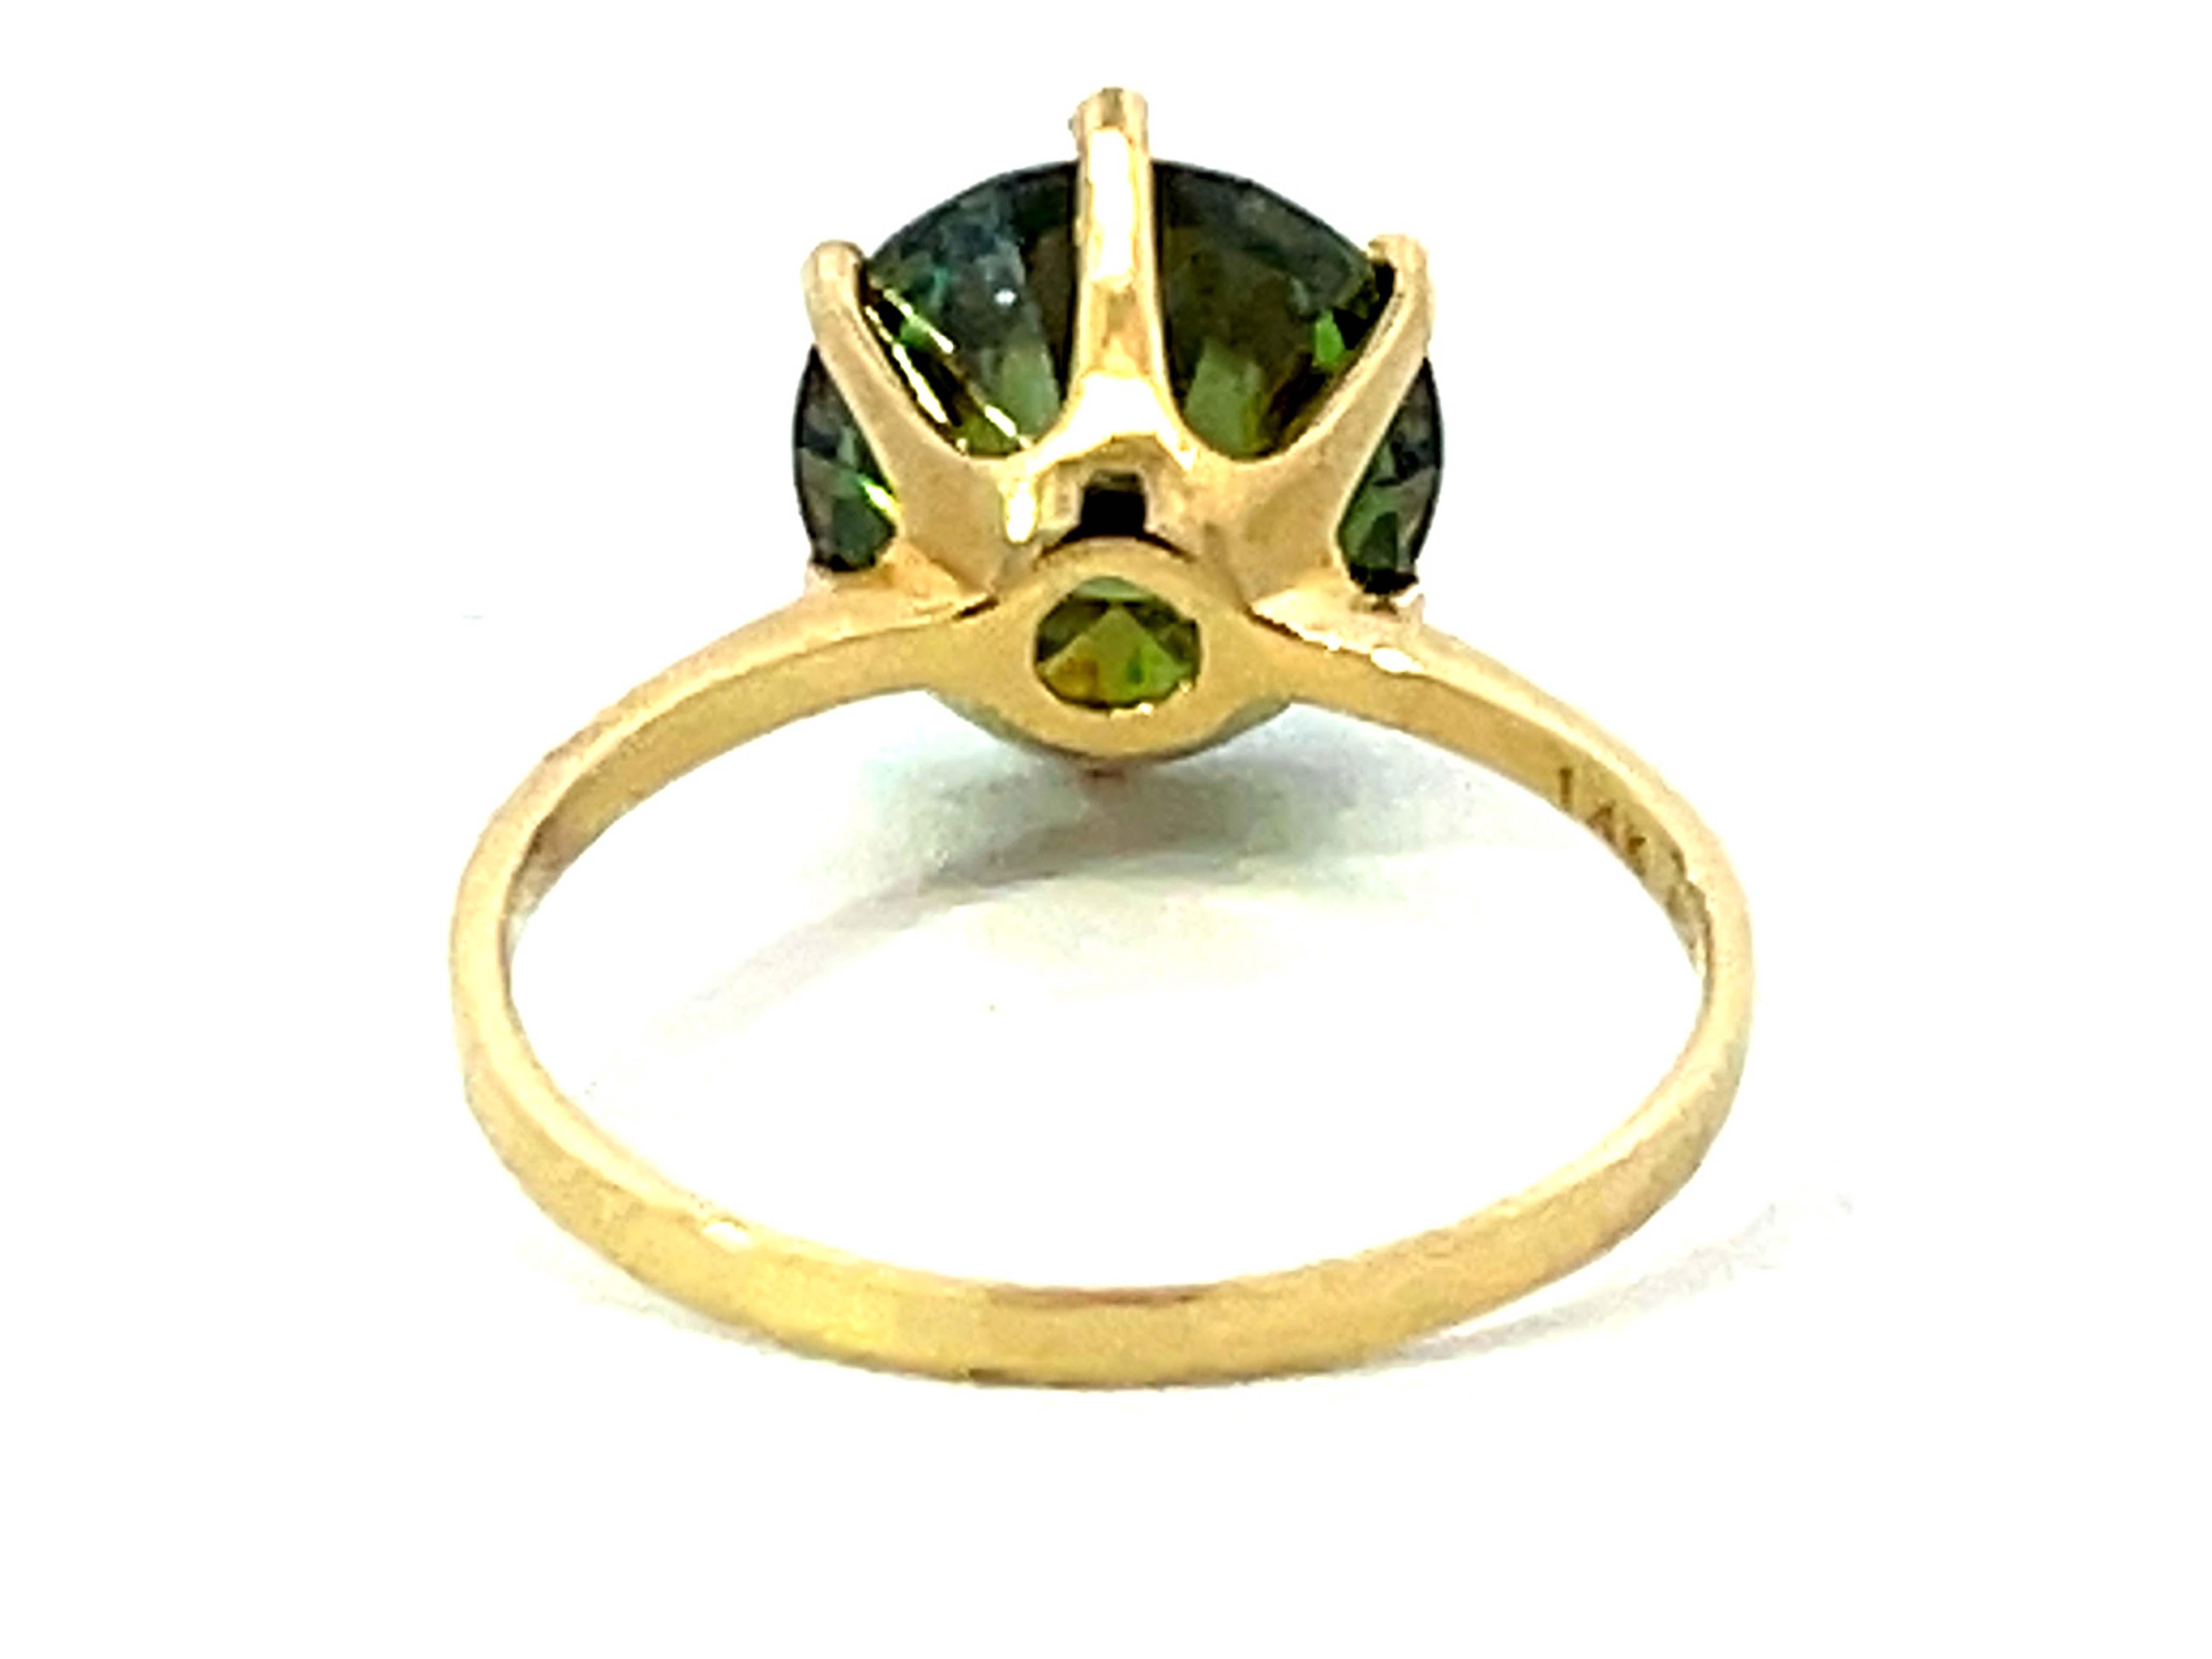 4 Carat Green Moissanite Ring in 14K Yellow Gold For Sale 2